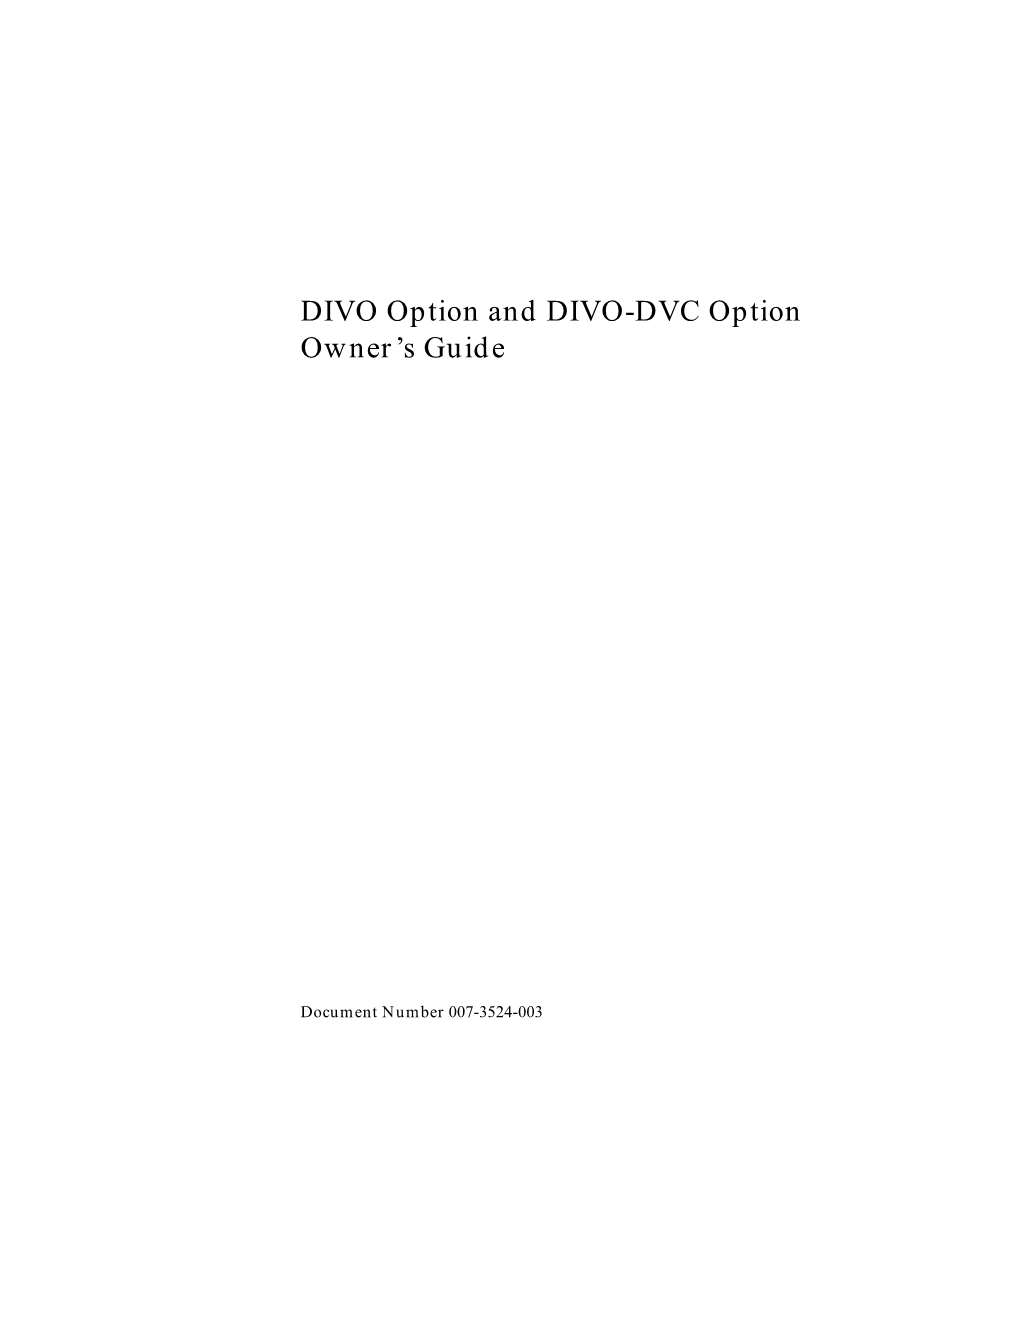 DIVO Option and DIVO-DVC Option Owner's Guide